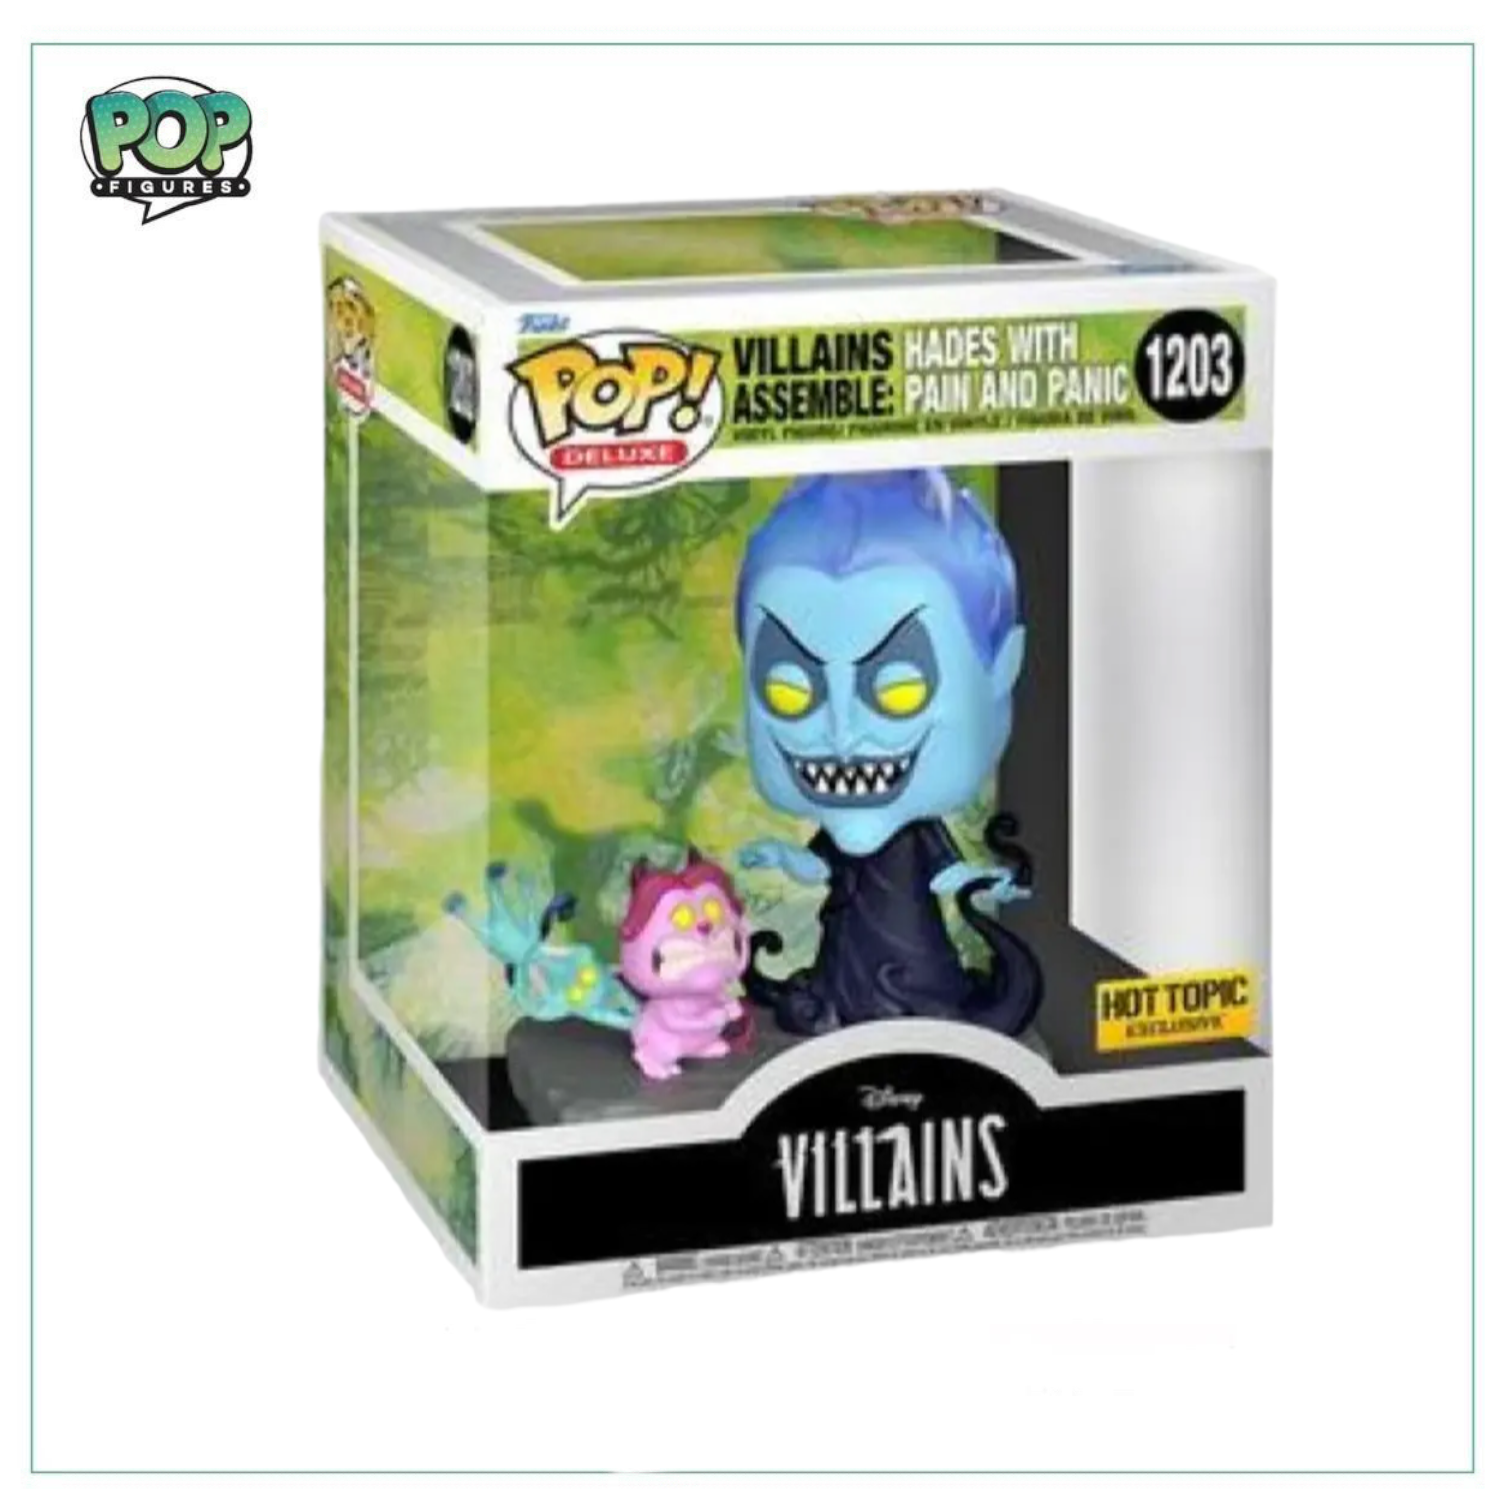 Villains Assemble: Hades With Pain And Panic #1203 Deluxe Funko Pop! Villains - Hot Topic Exclusive - Angry Cat